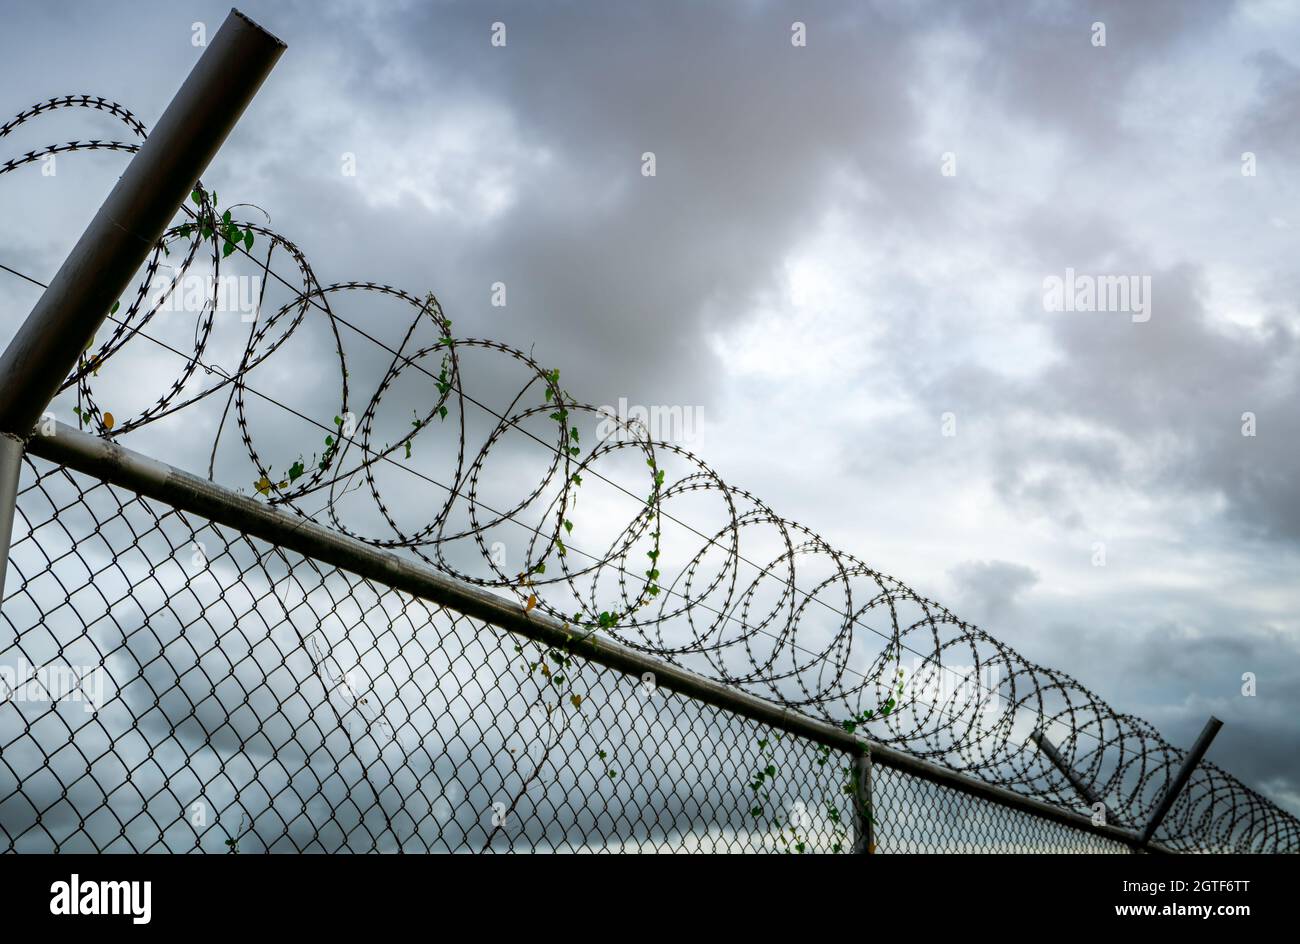 Low Angle View Of Barbed Wire Fence Against Sky Stock Photo